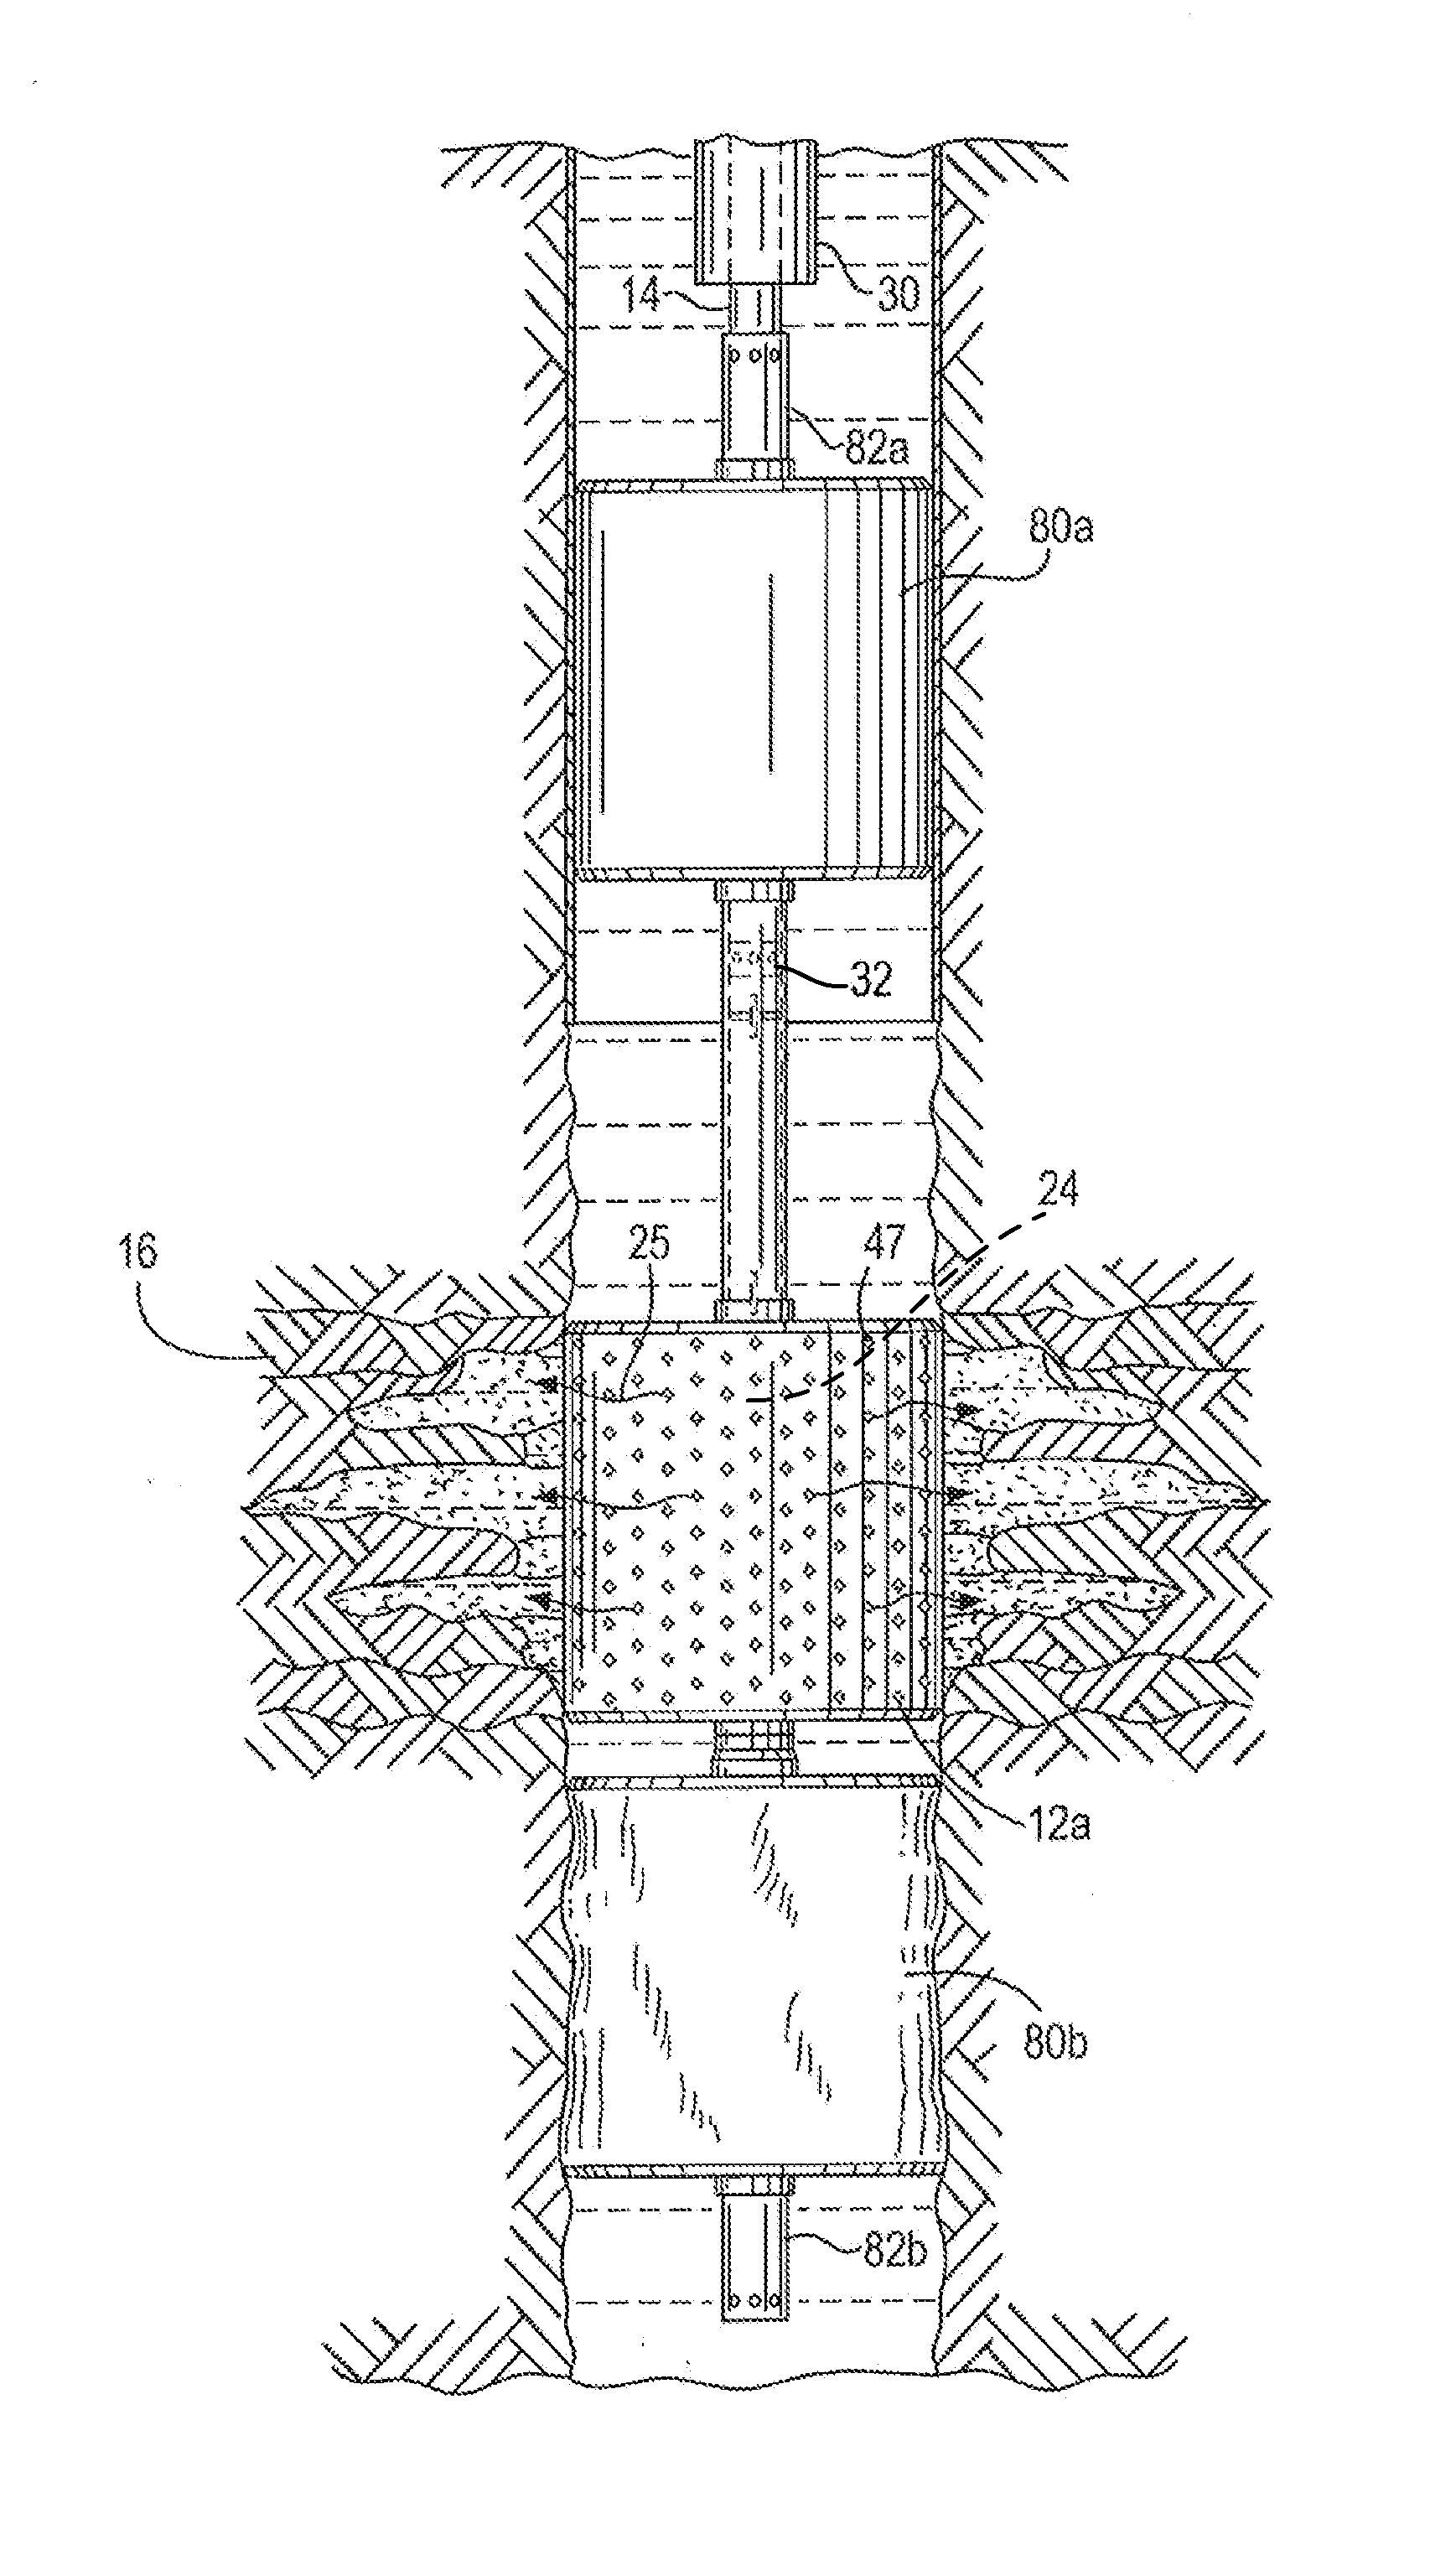 Method and apparatus for sealing an undesirable formation zone in the wall of a wellbore